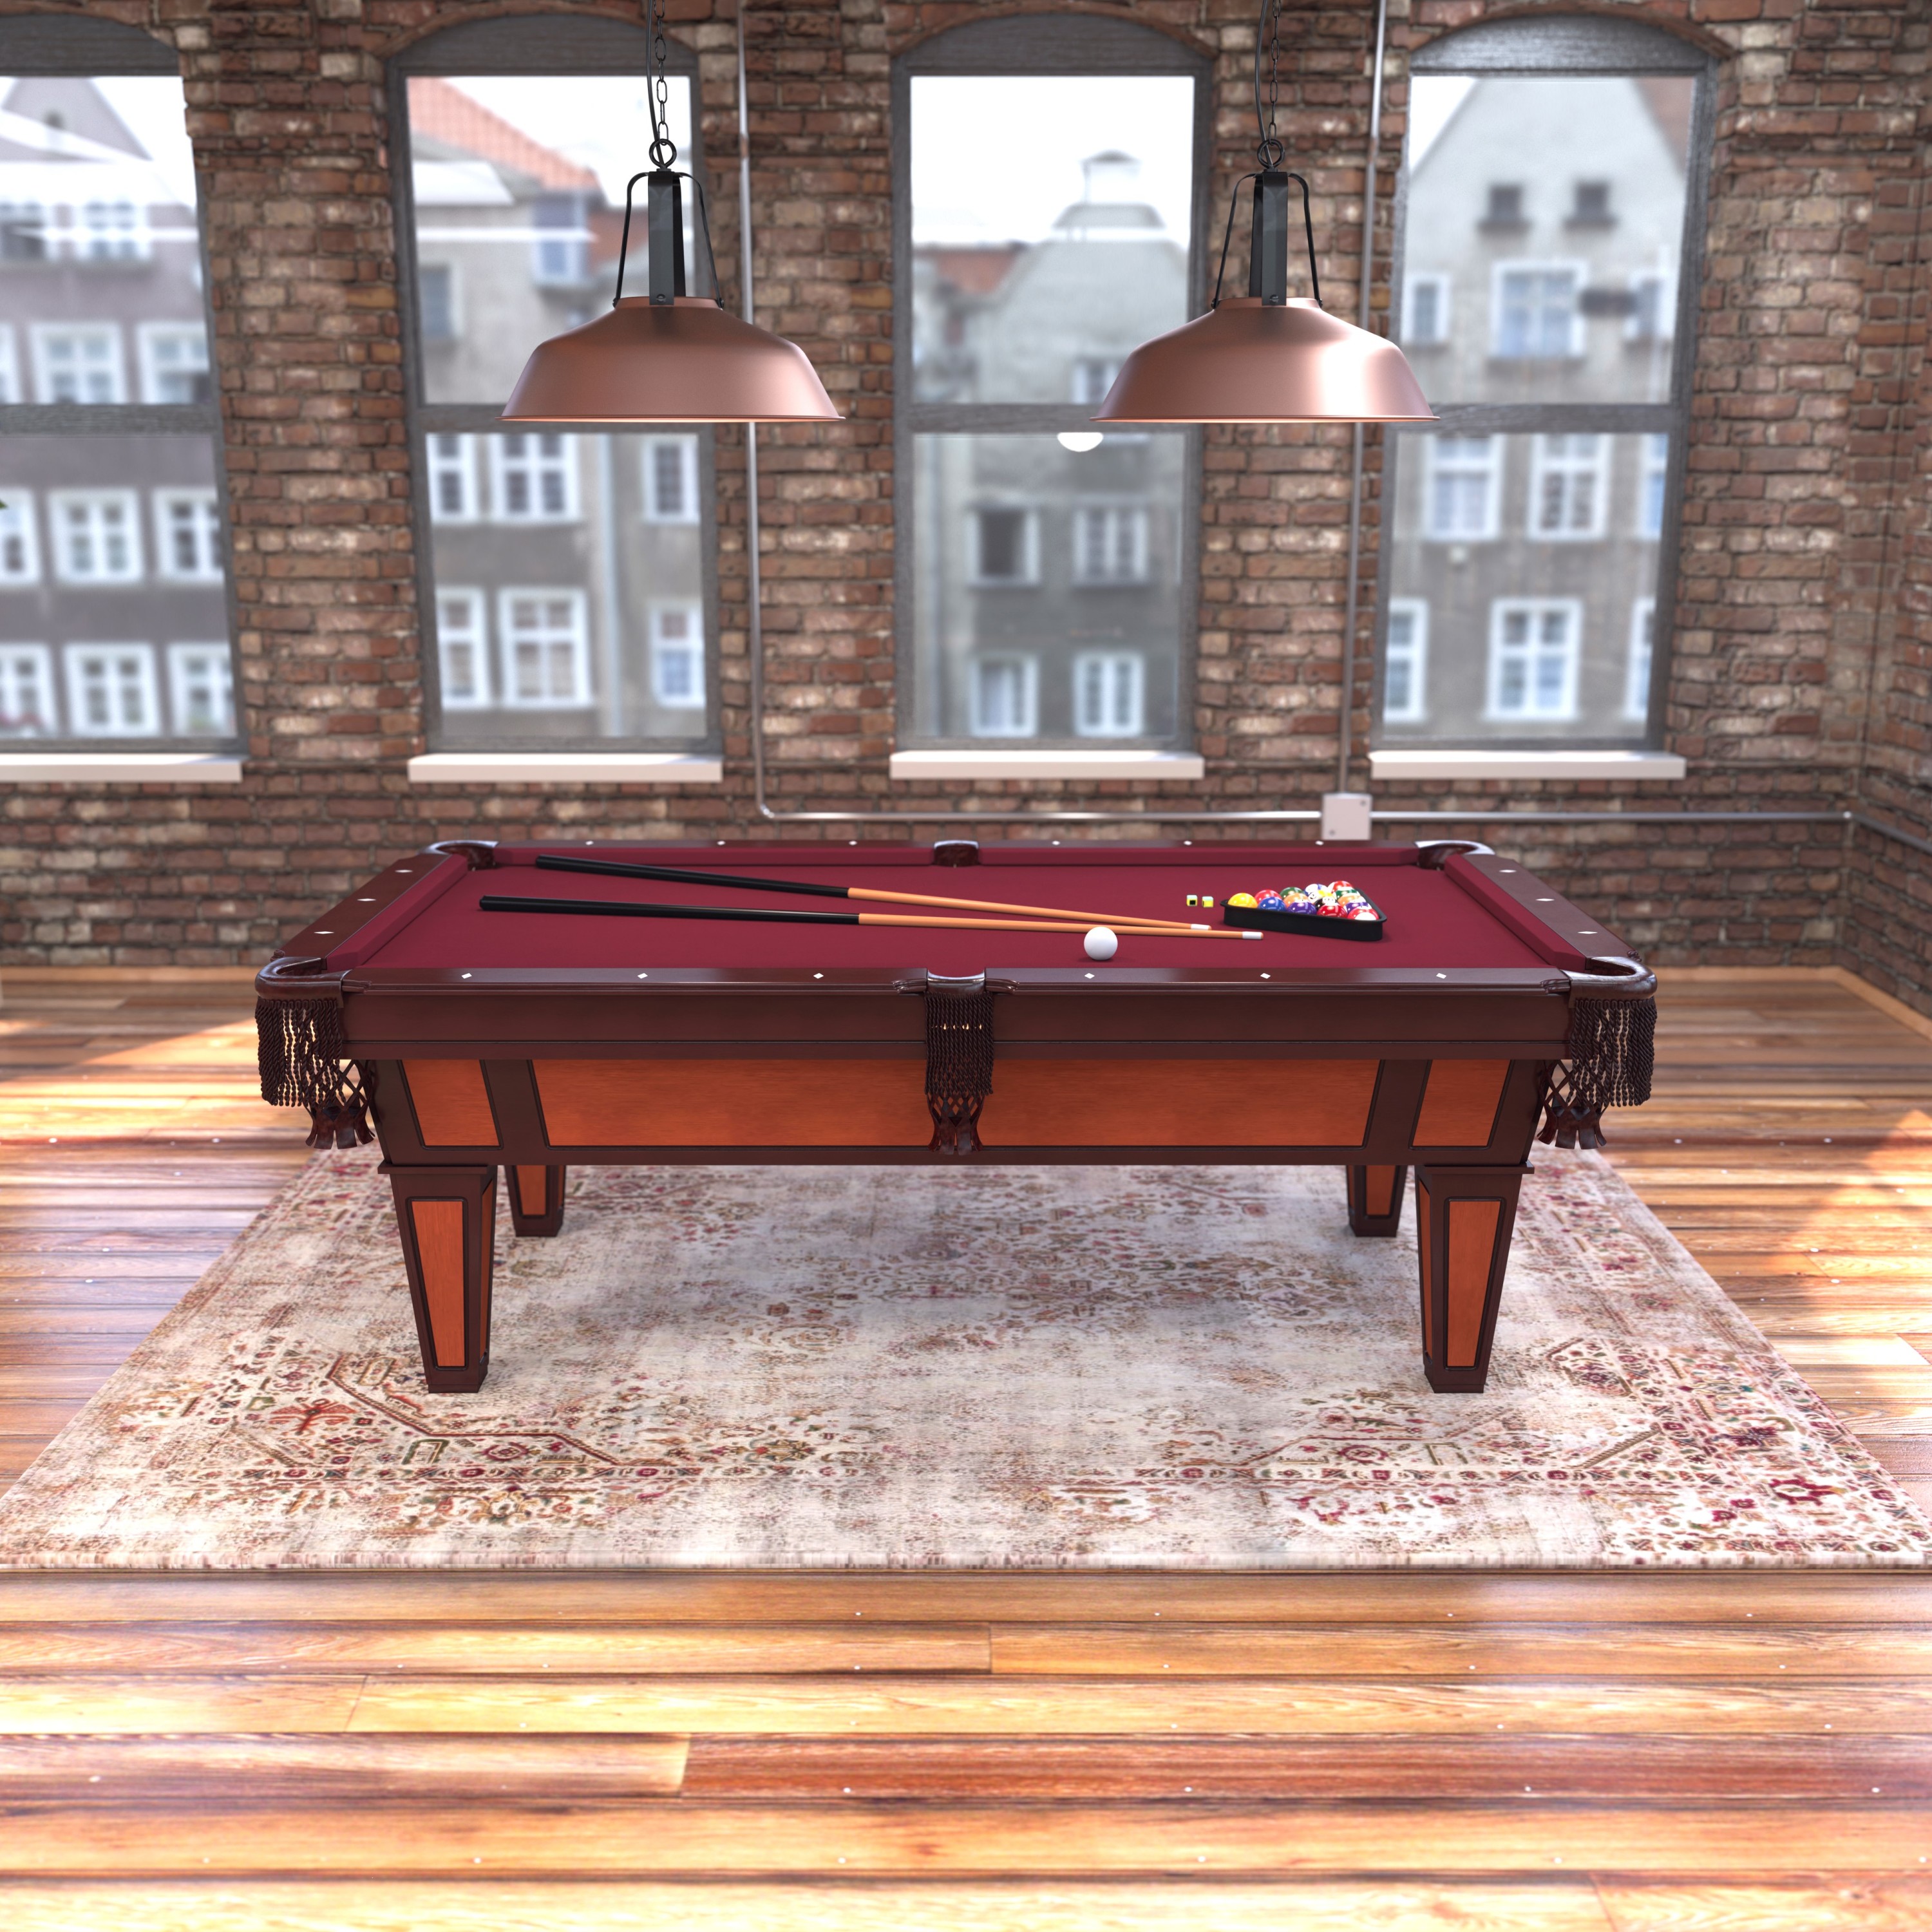 Fat Cat Reno 7.5' Pool Table with Pool Cues and Accessories - image 11 of 13